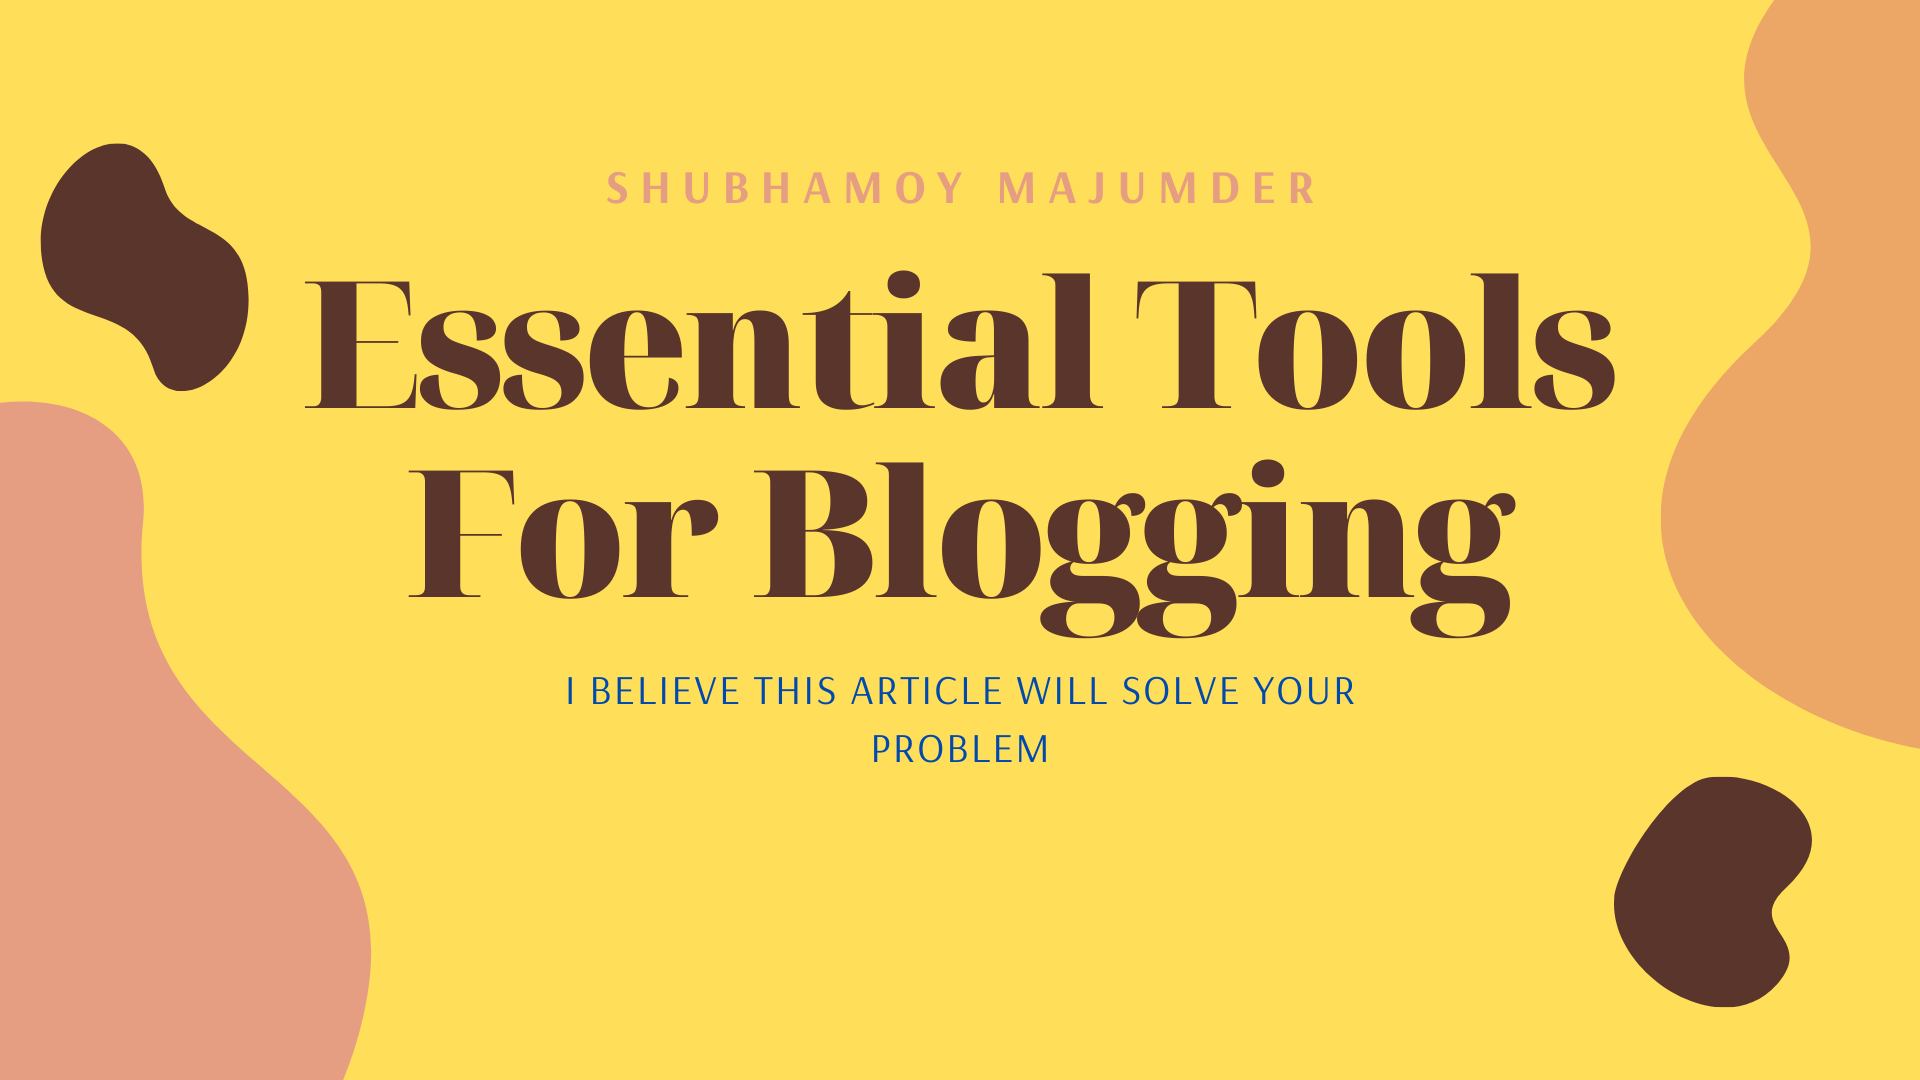 14 Most Essential Tools for Blogging 2021